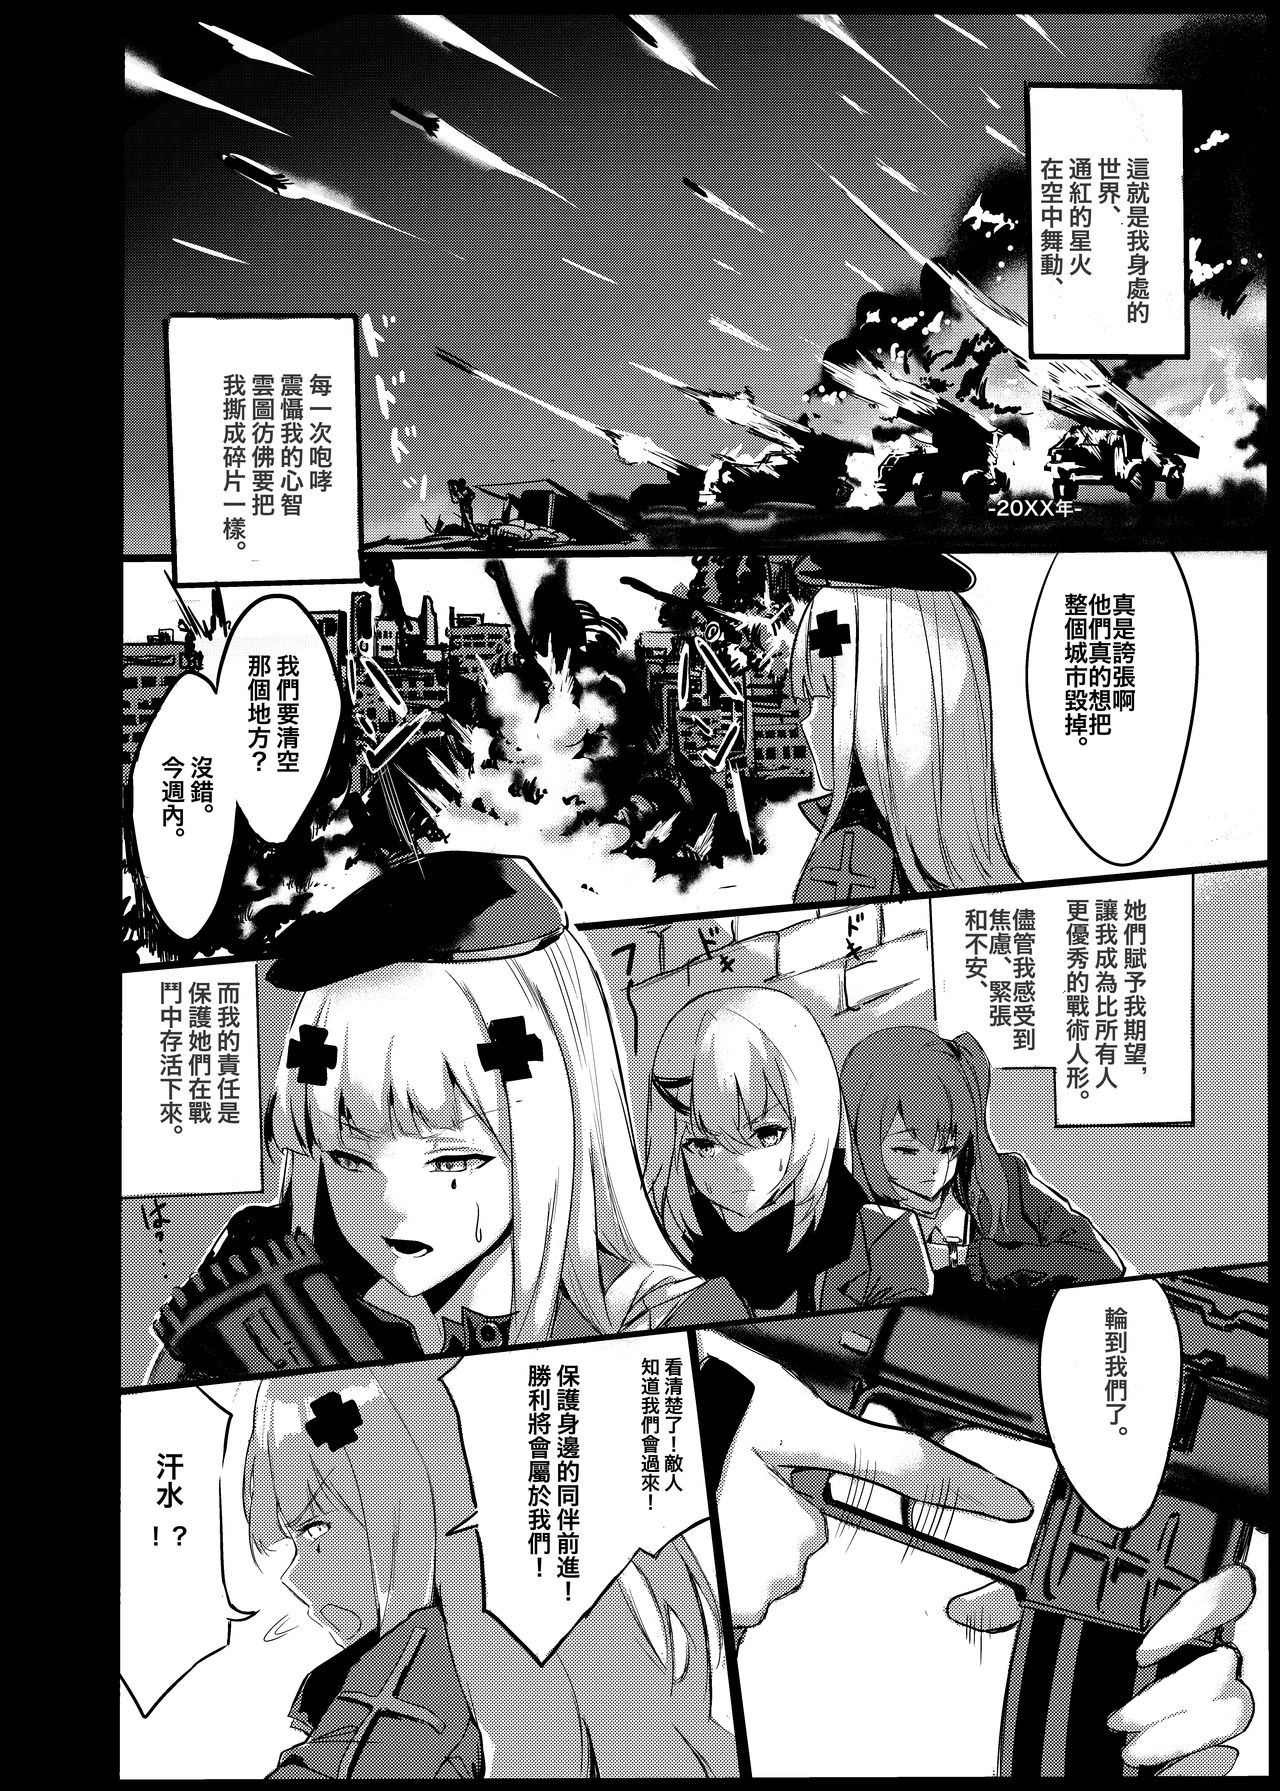 (FF33) [史本] HK416 Project (Girls' Frontline) [Chinese] [Sample] (FF33) [史本] HK416 Project (少女前線) [中国語] [見本]